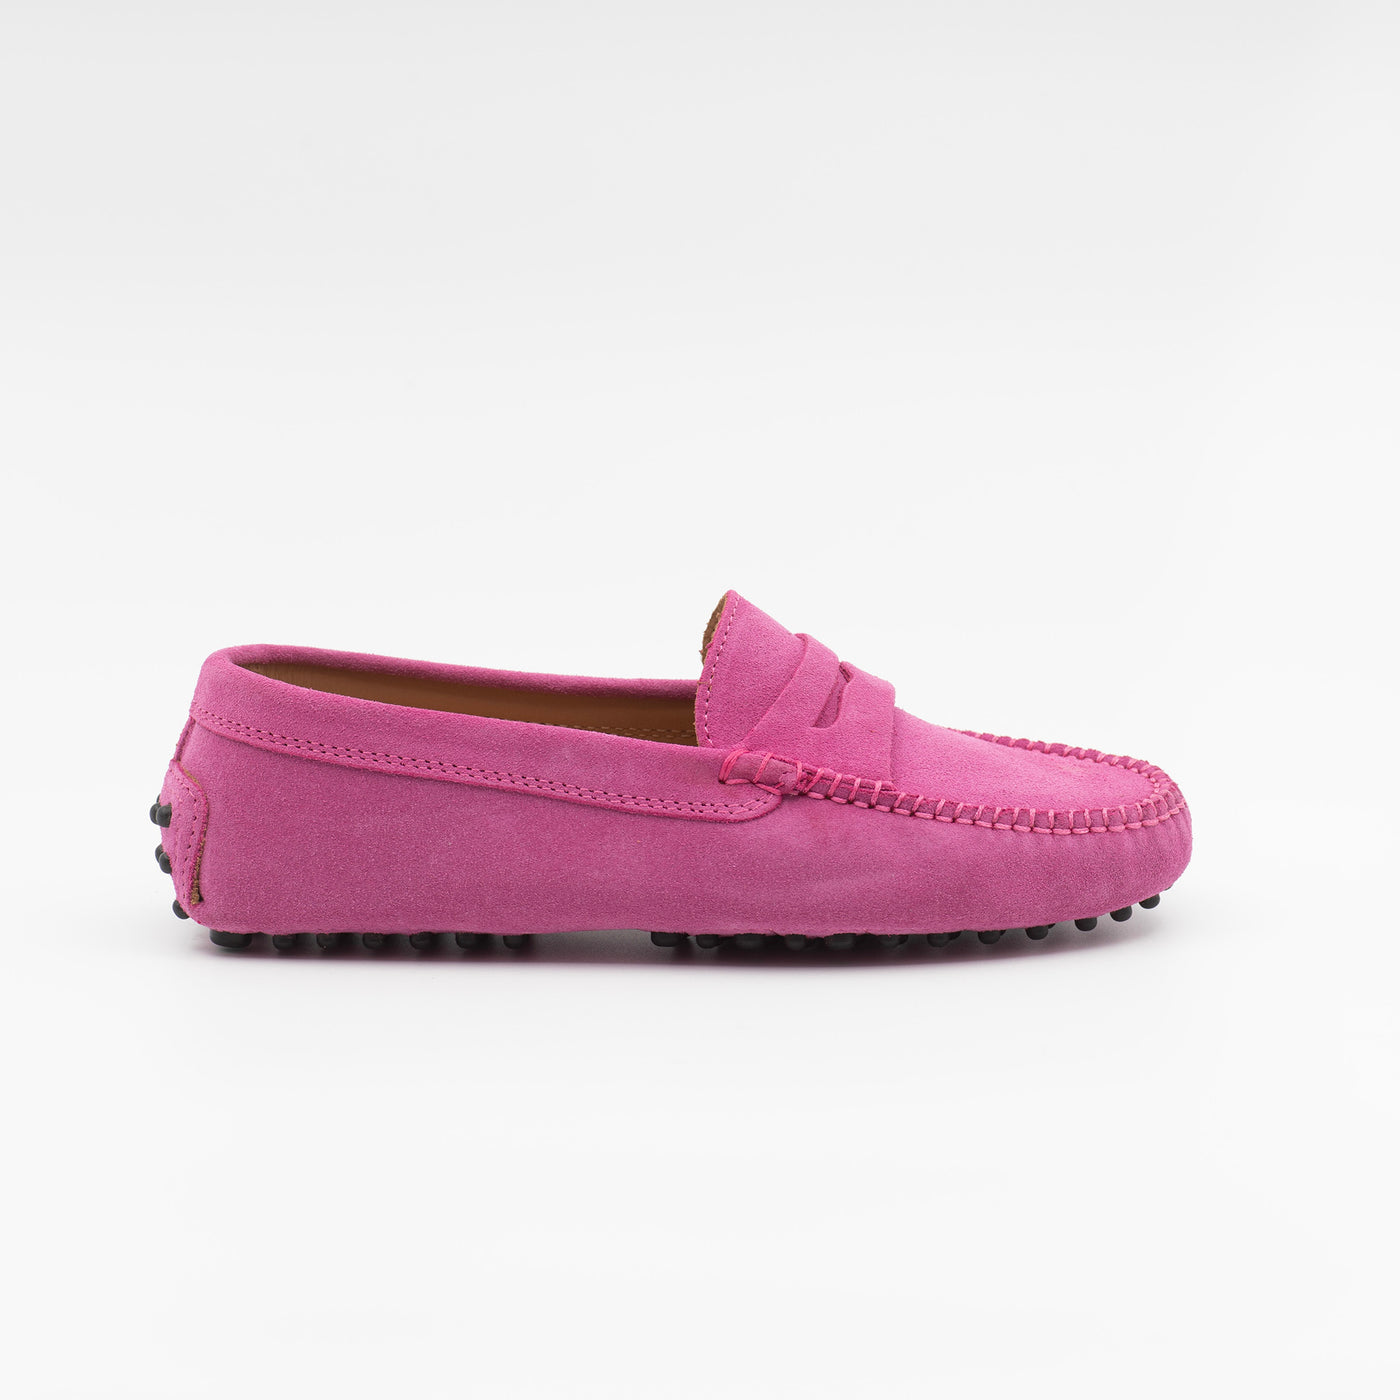 Gommino loafer in pink suede leather